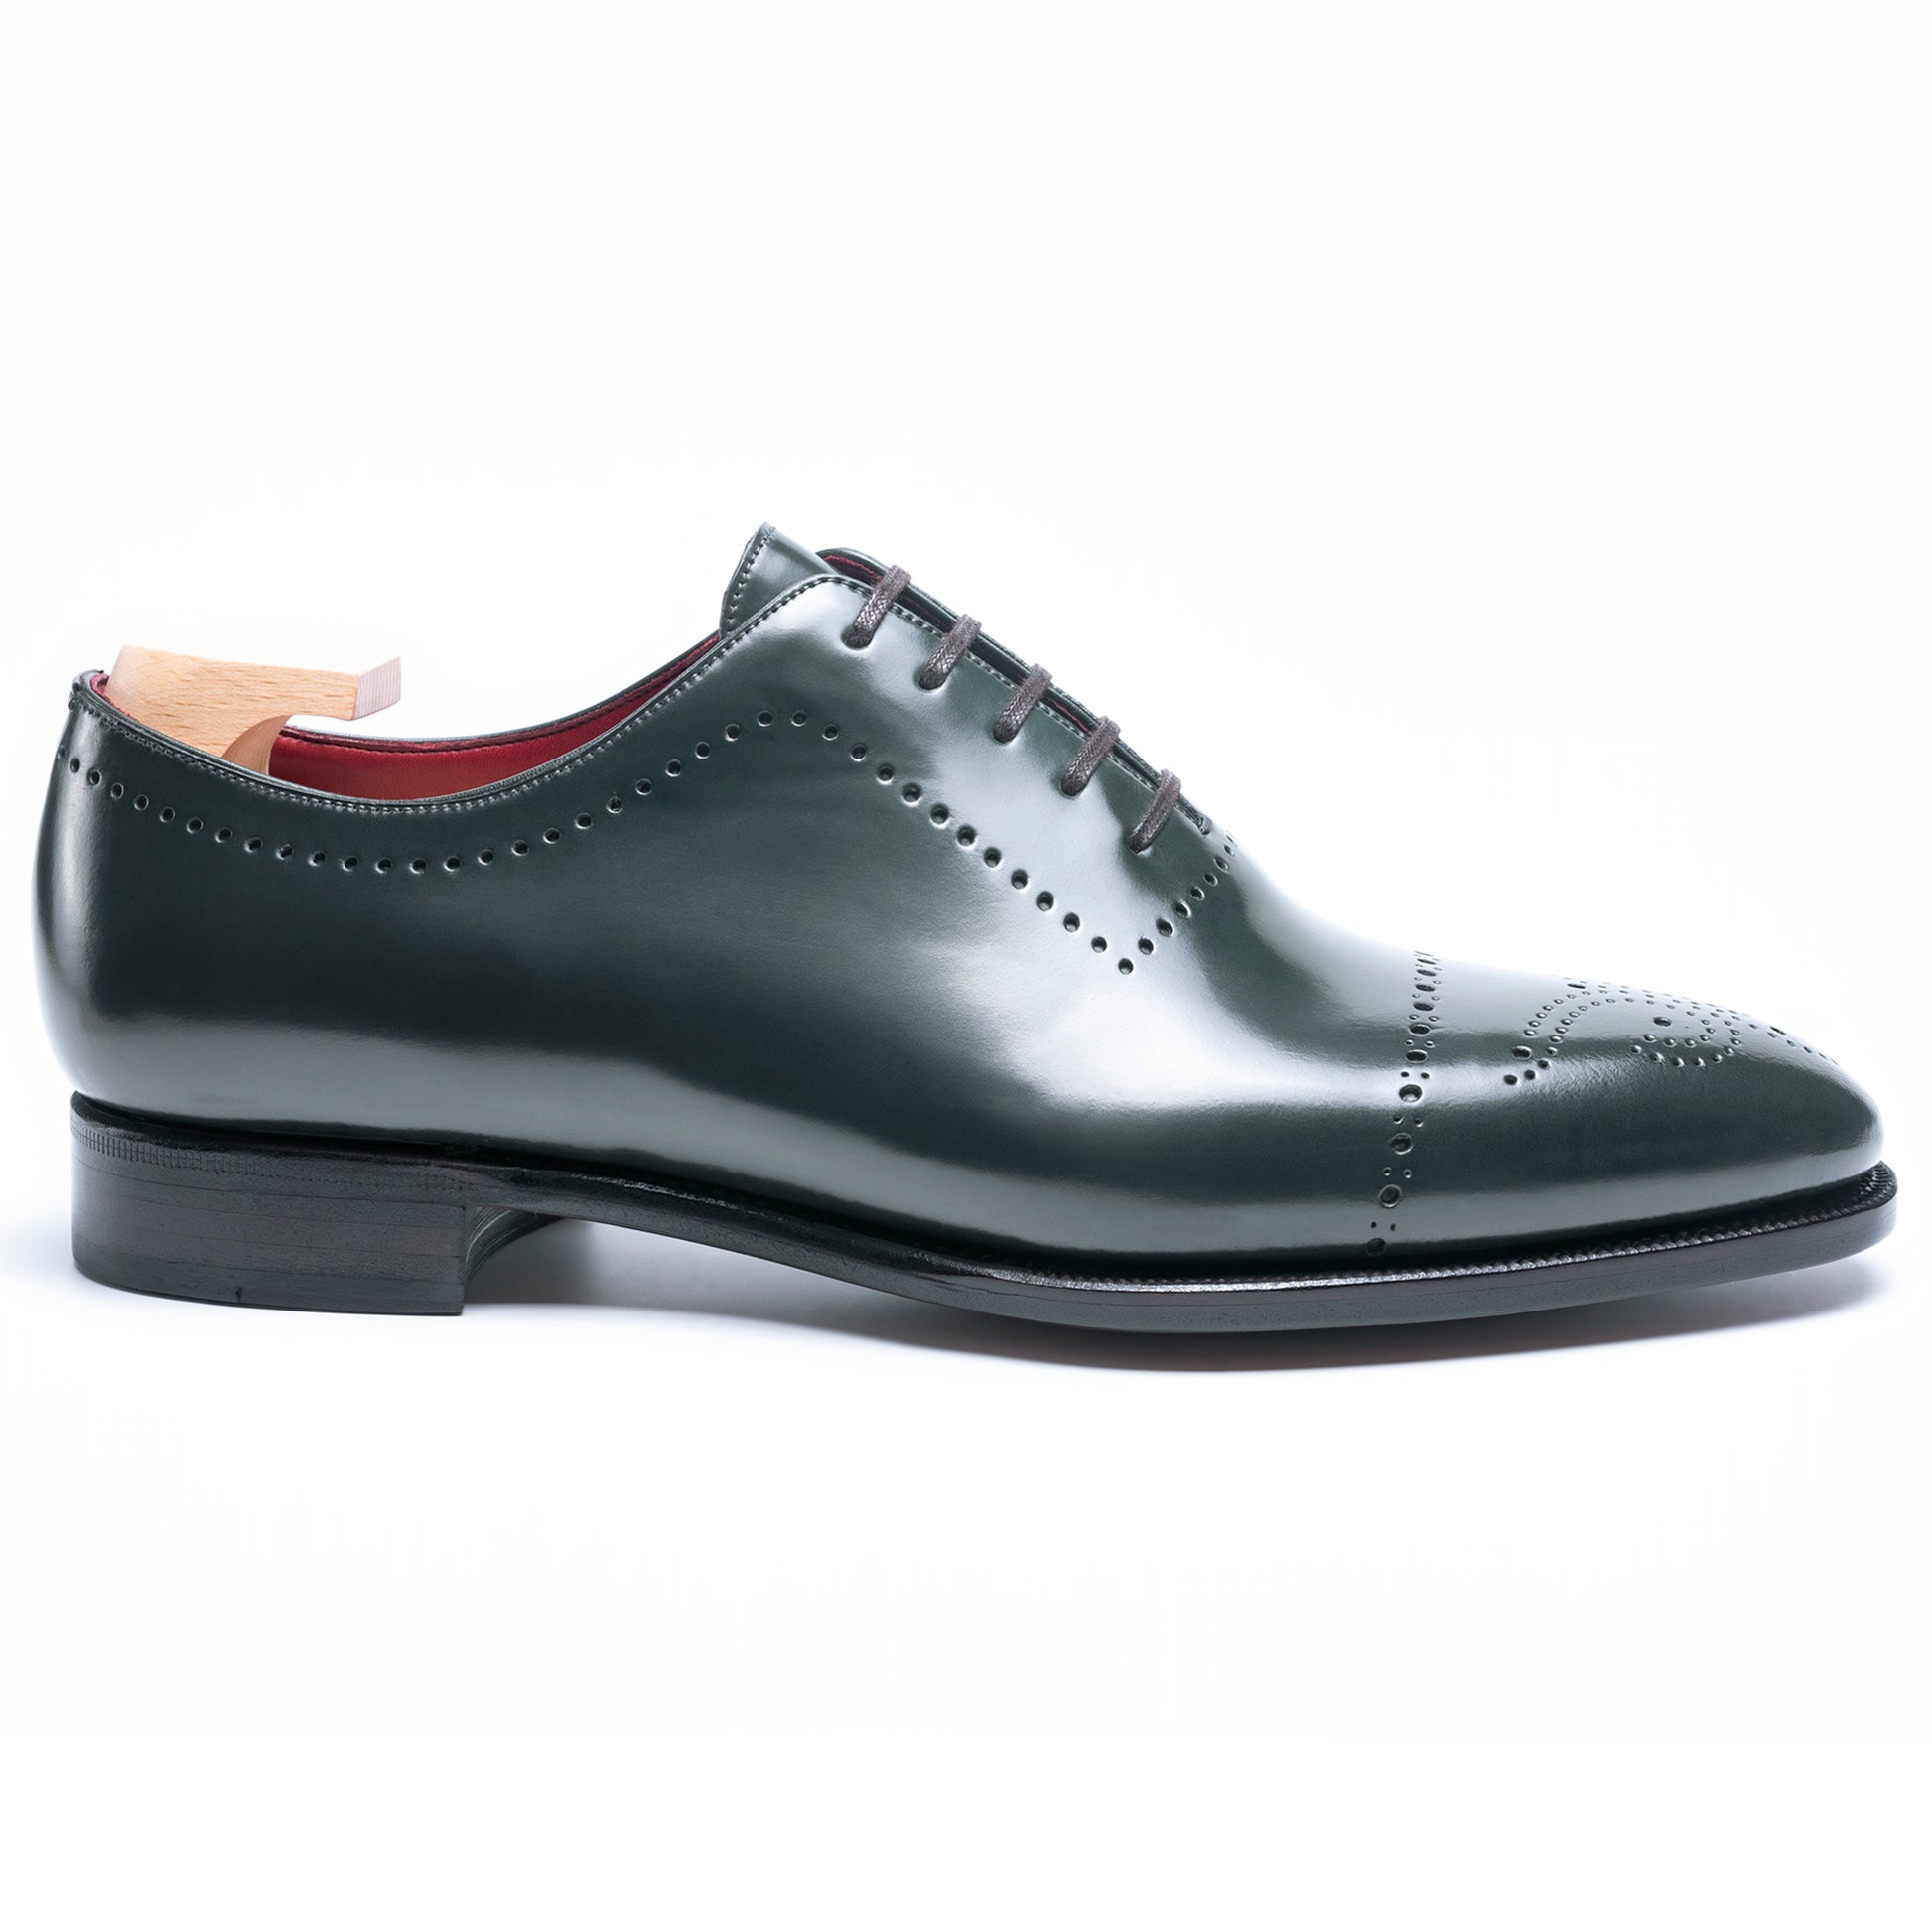 TLB Mallorca leather shoes - Men's Oxford shoes - Cordovan